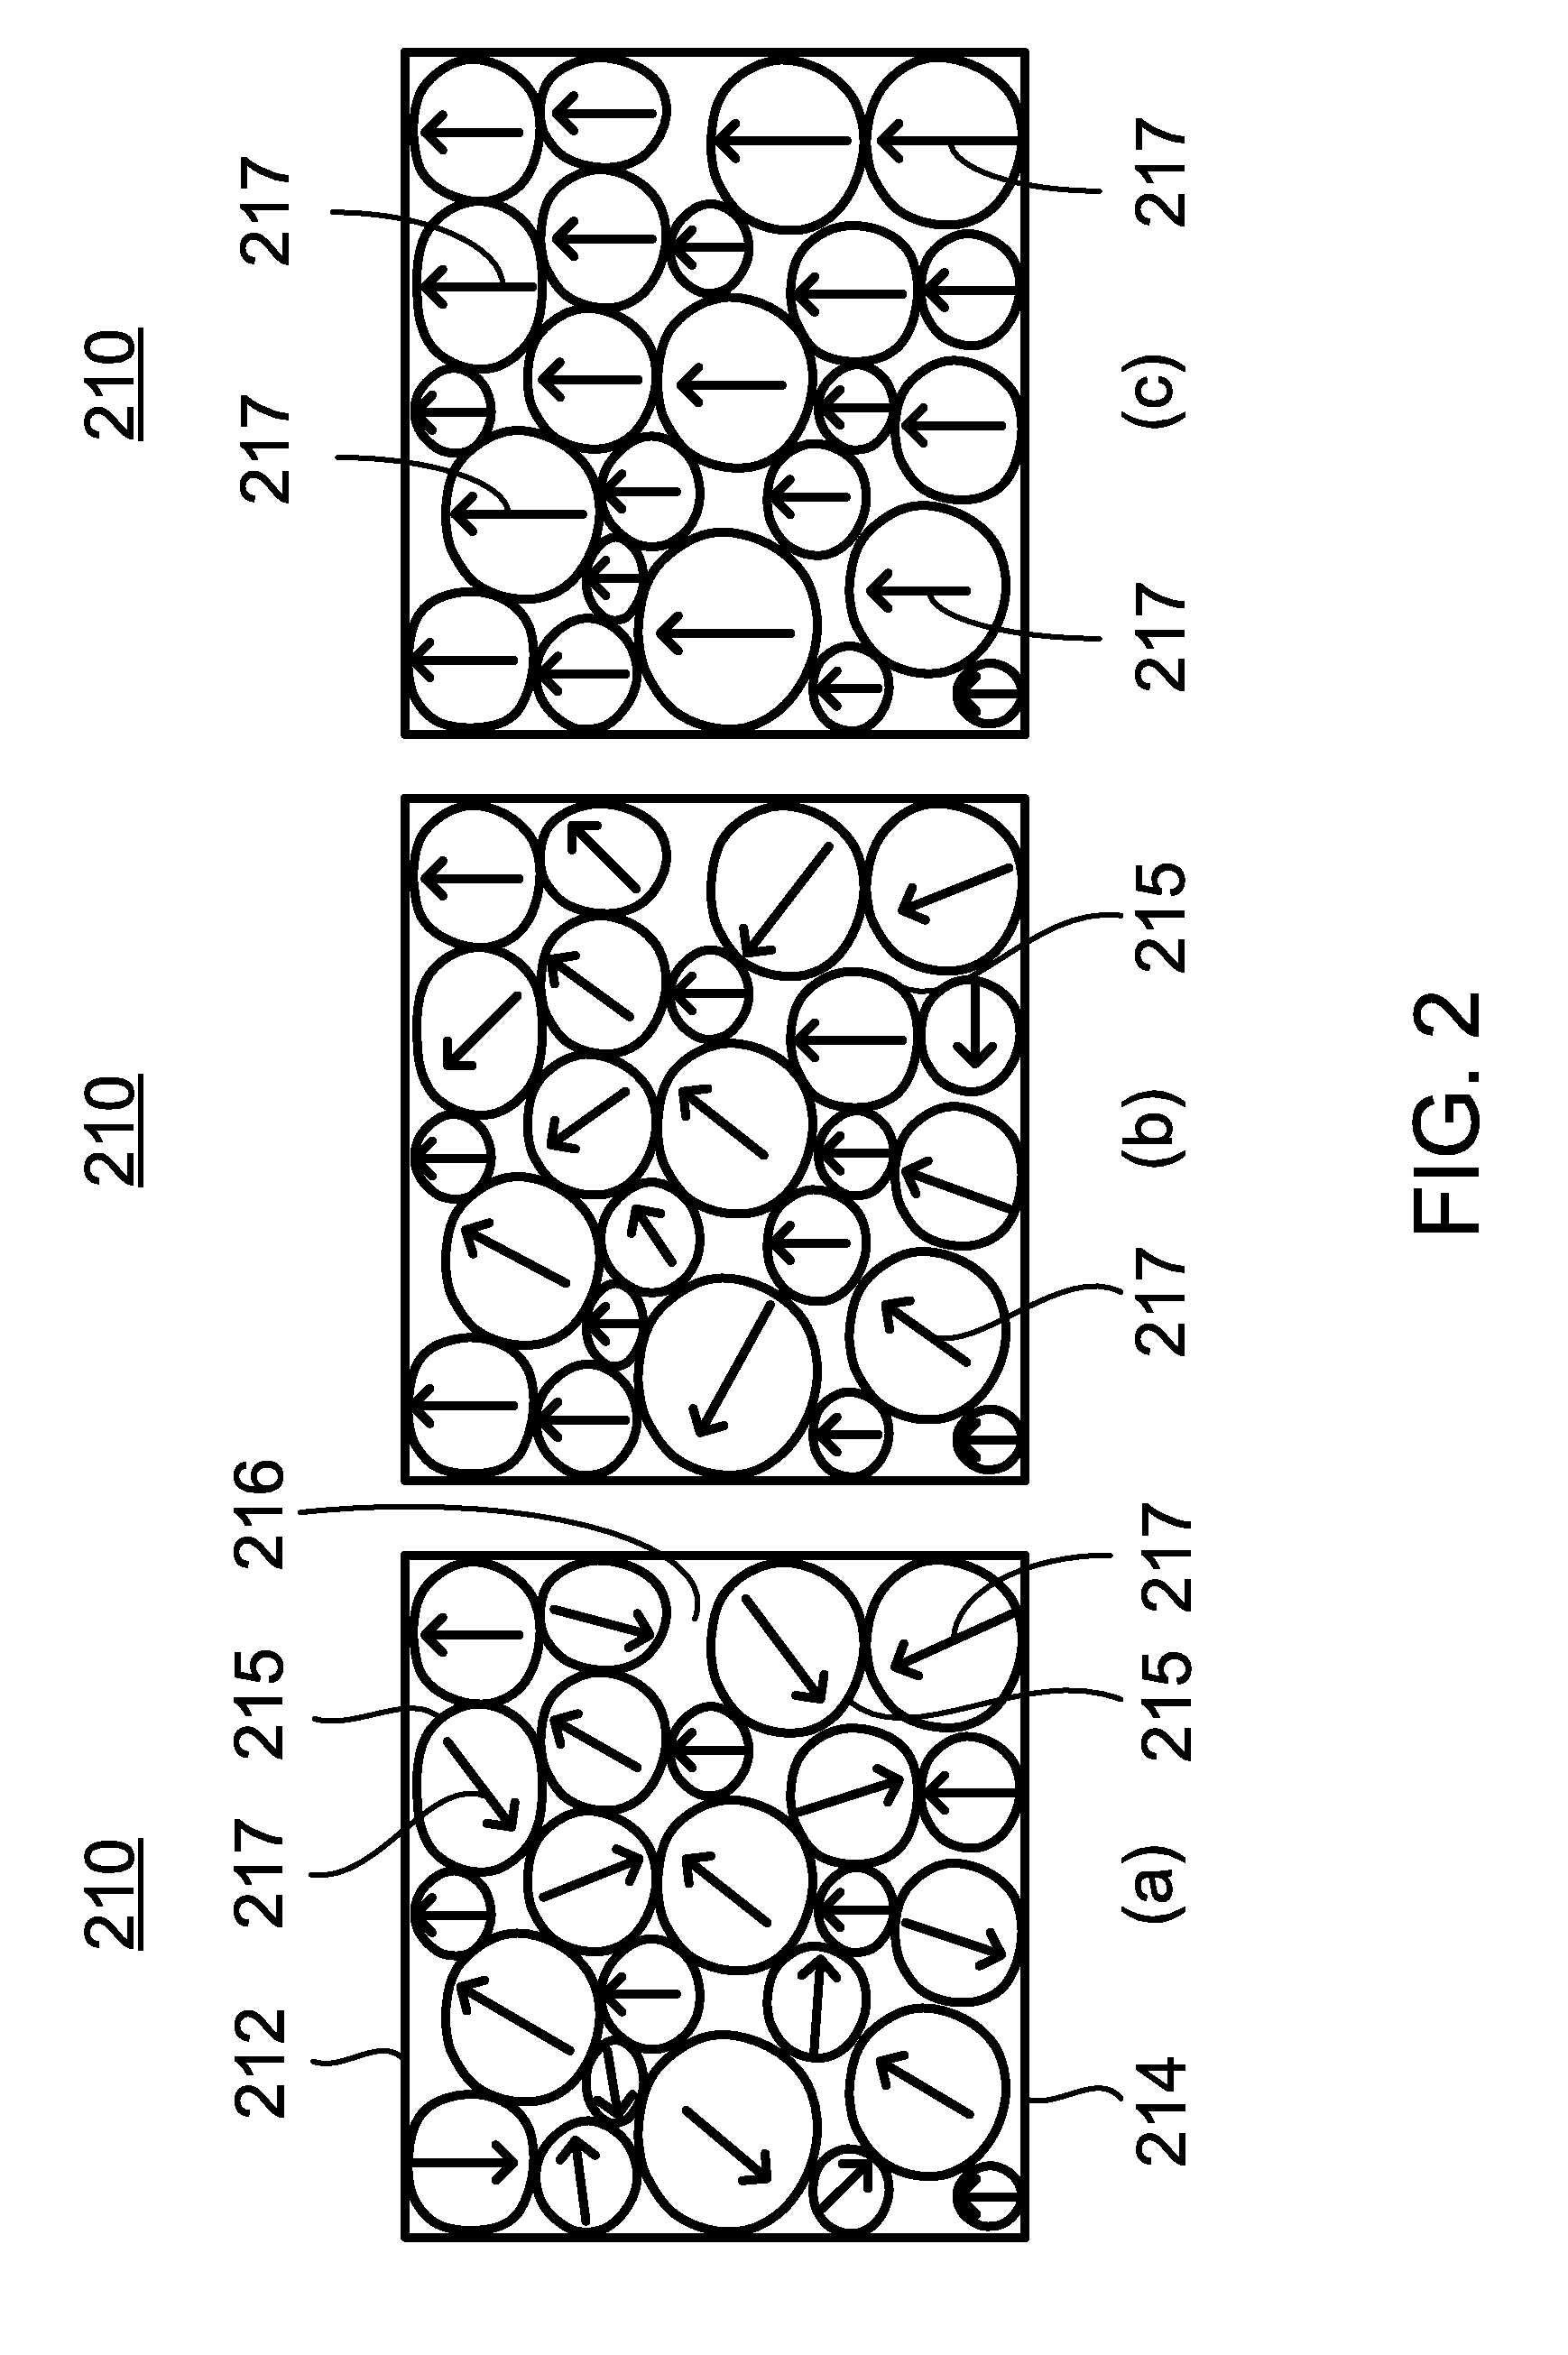 Apparatus and method for ferroelectric conversion of heat to electrical energy